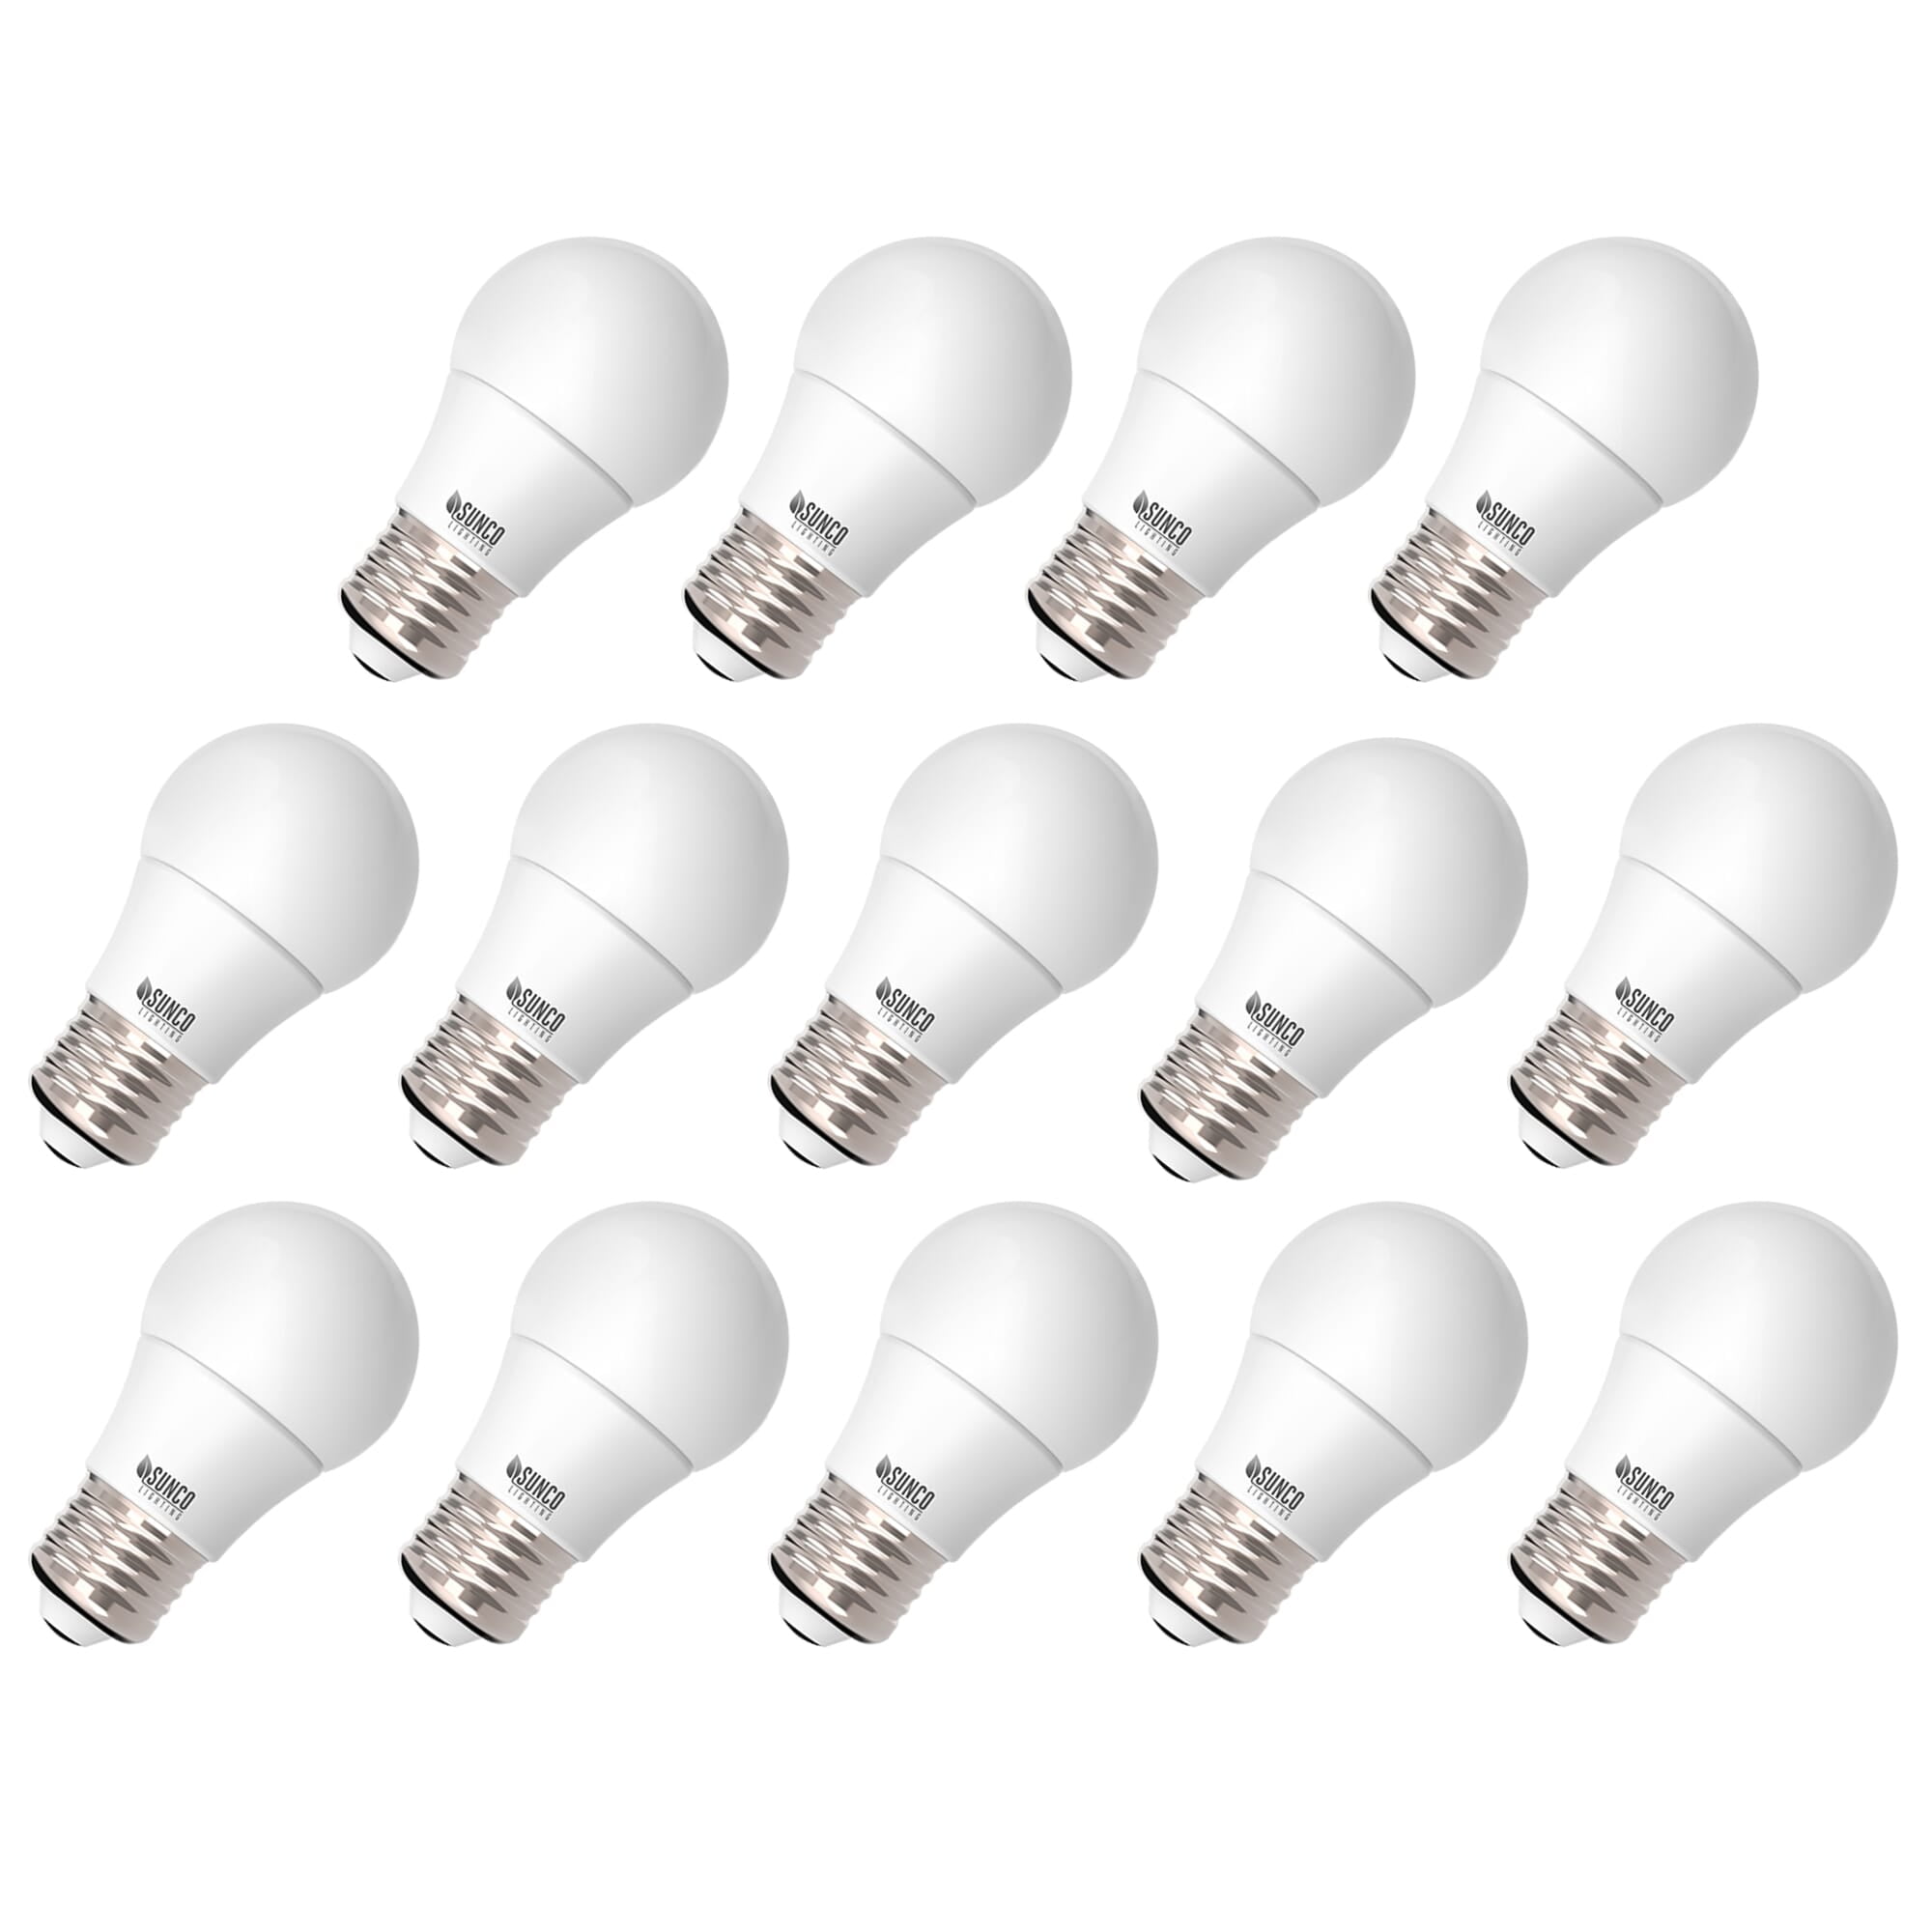 Replacement for Cec Industries 3s6/5/dc/120v Light Bulb by Technical Precision 10 Pack 